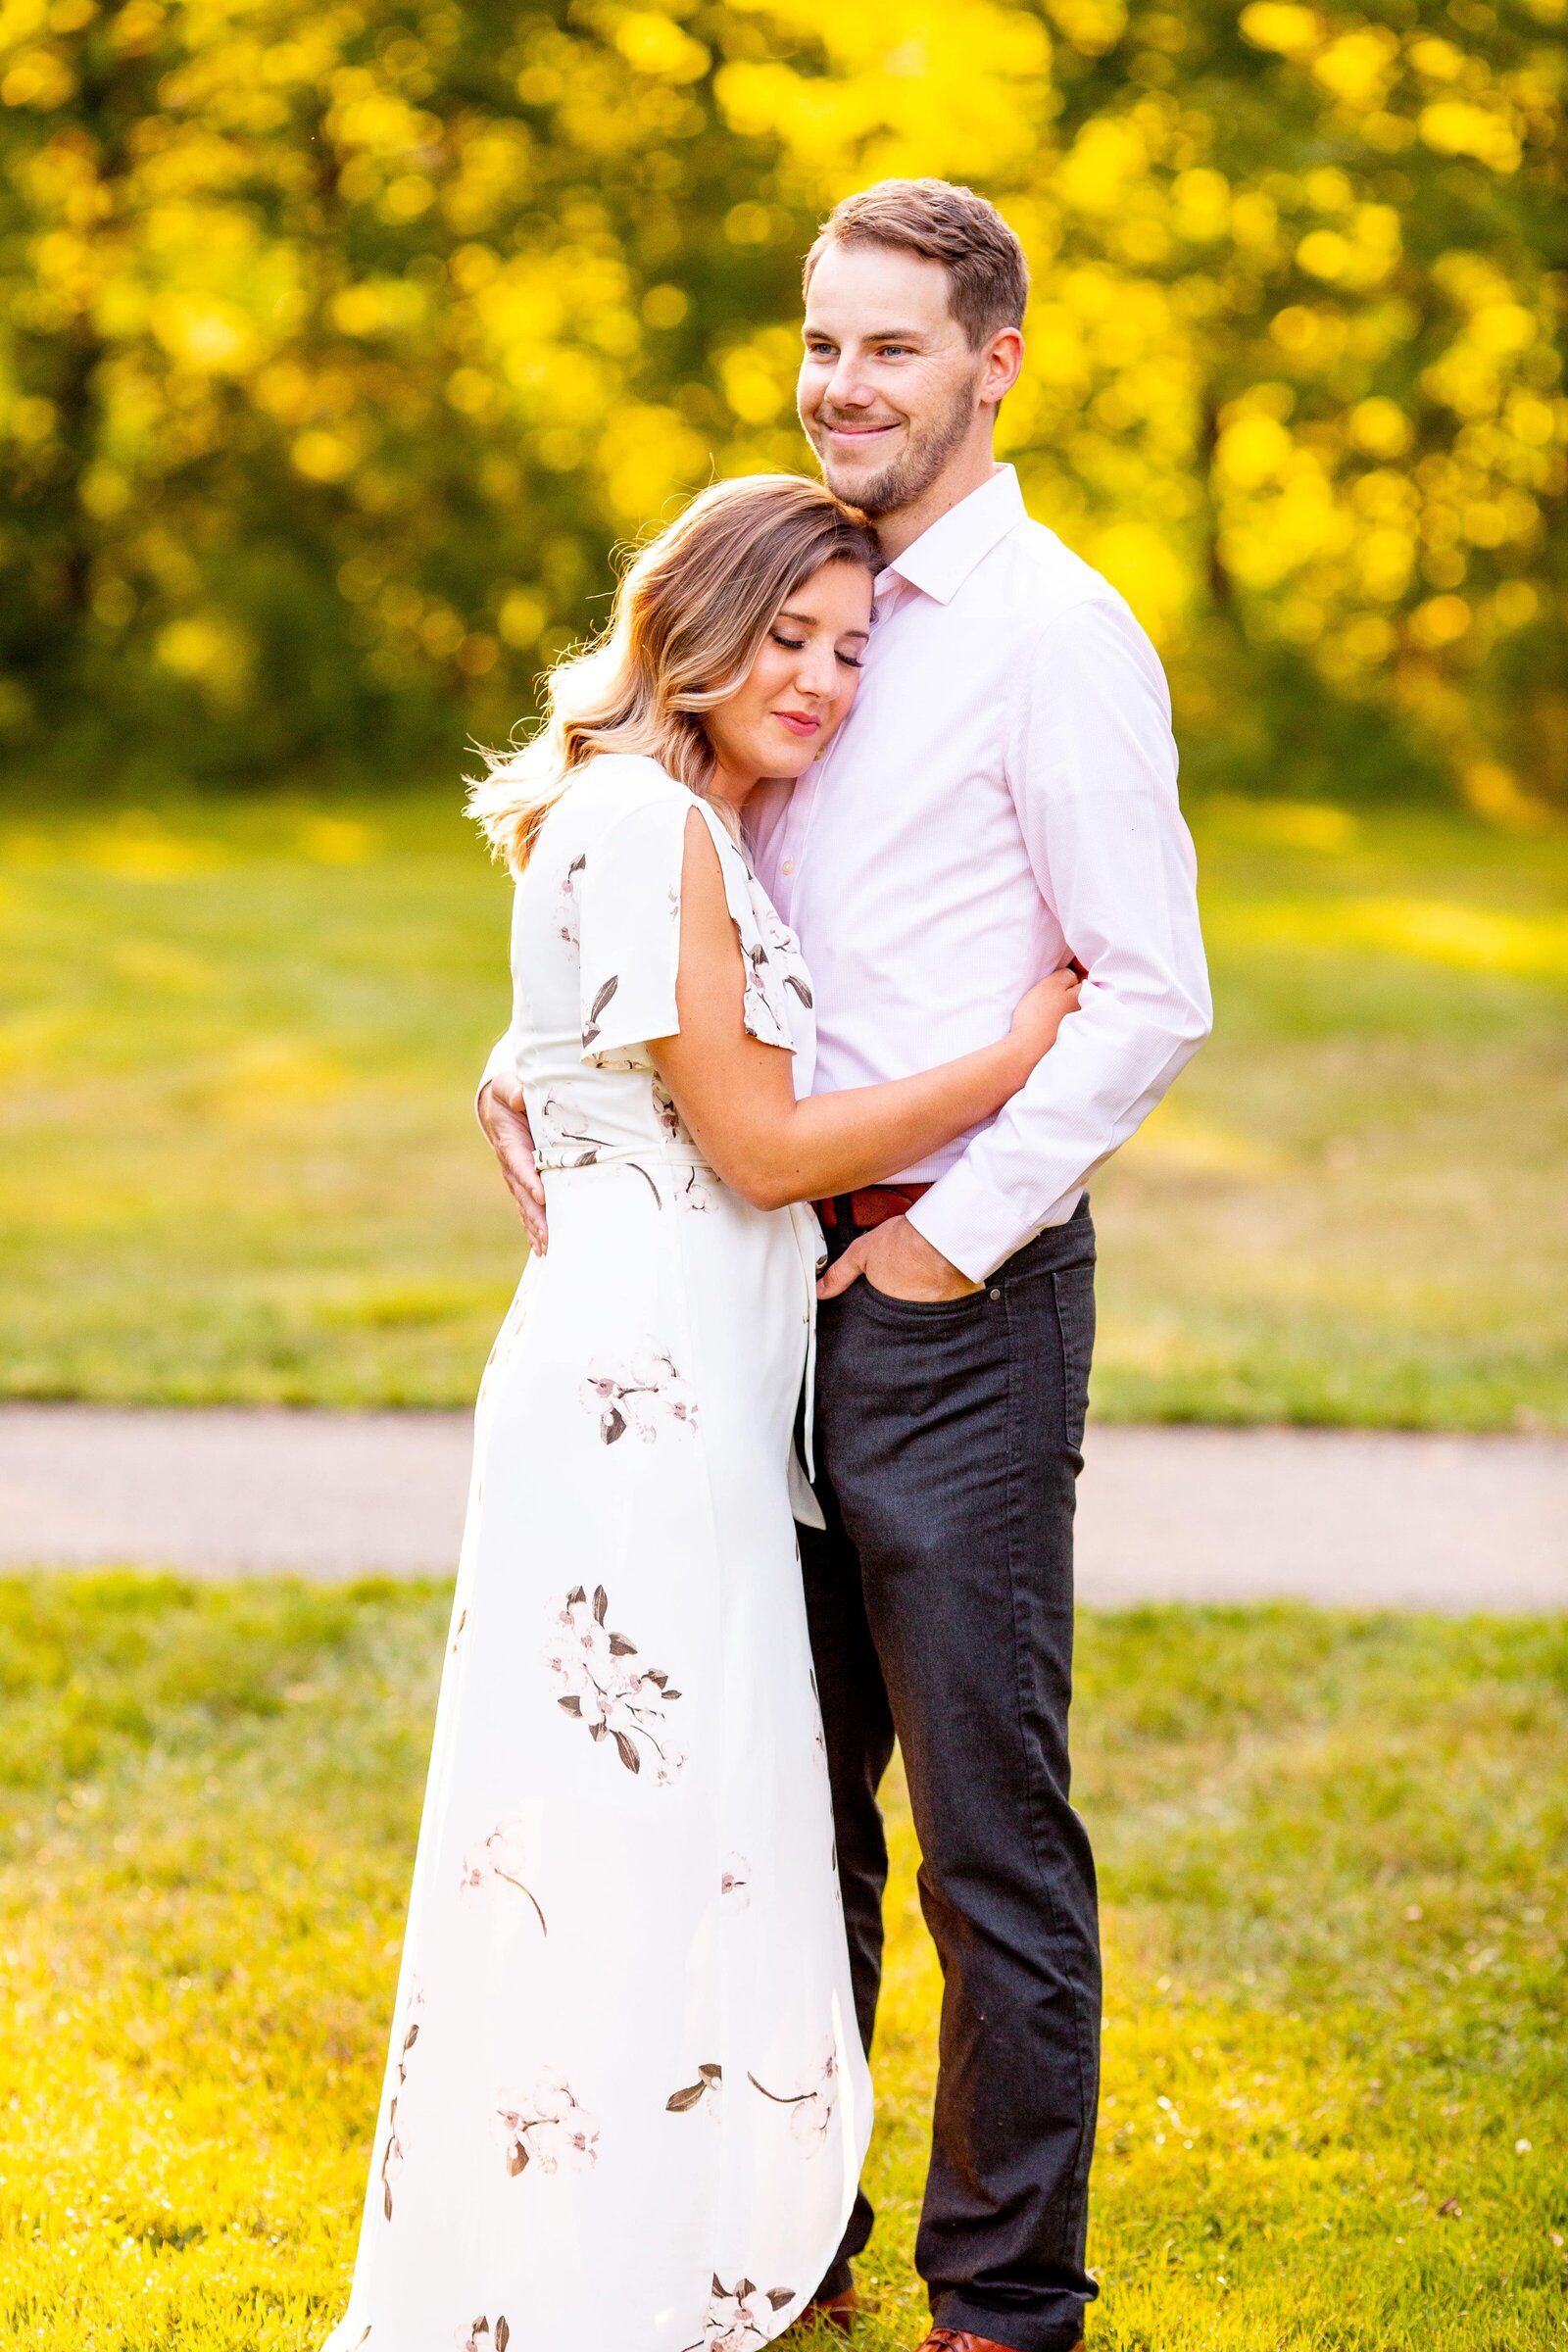 Woman rests her head on her fiance during their spring engagement session.